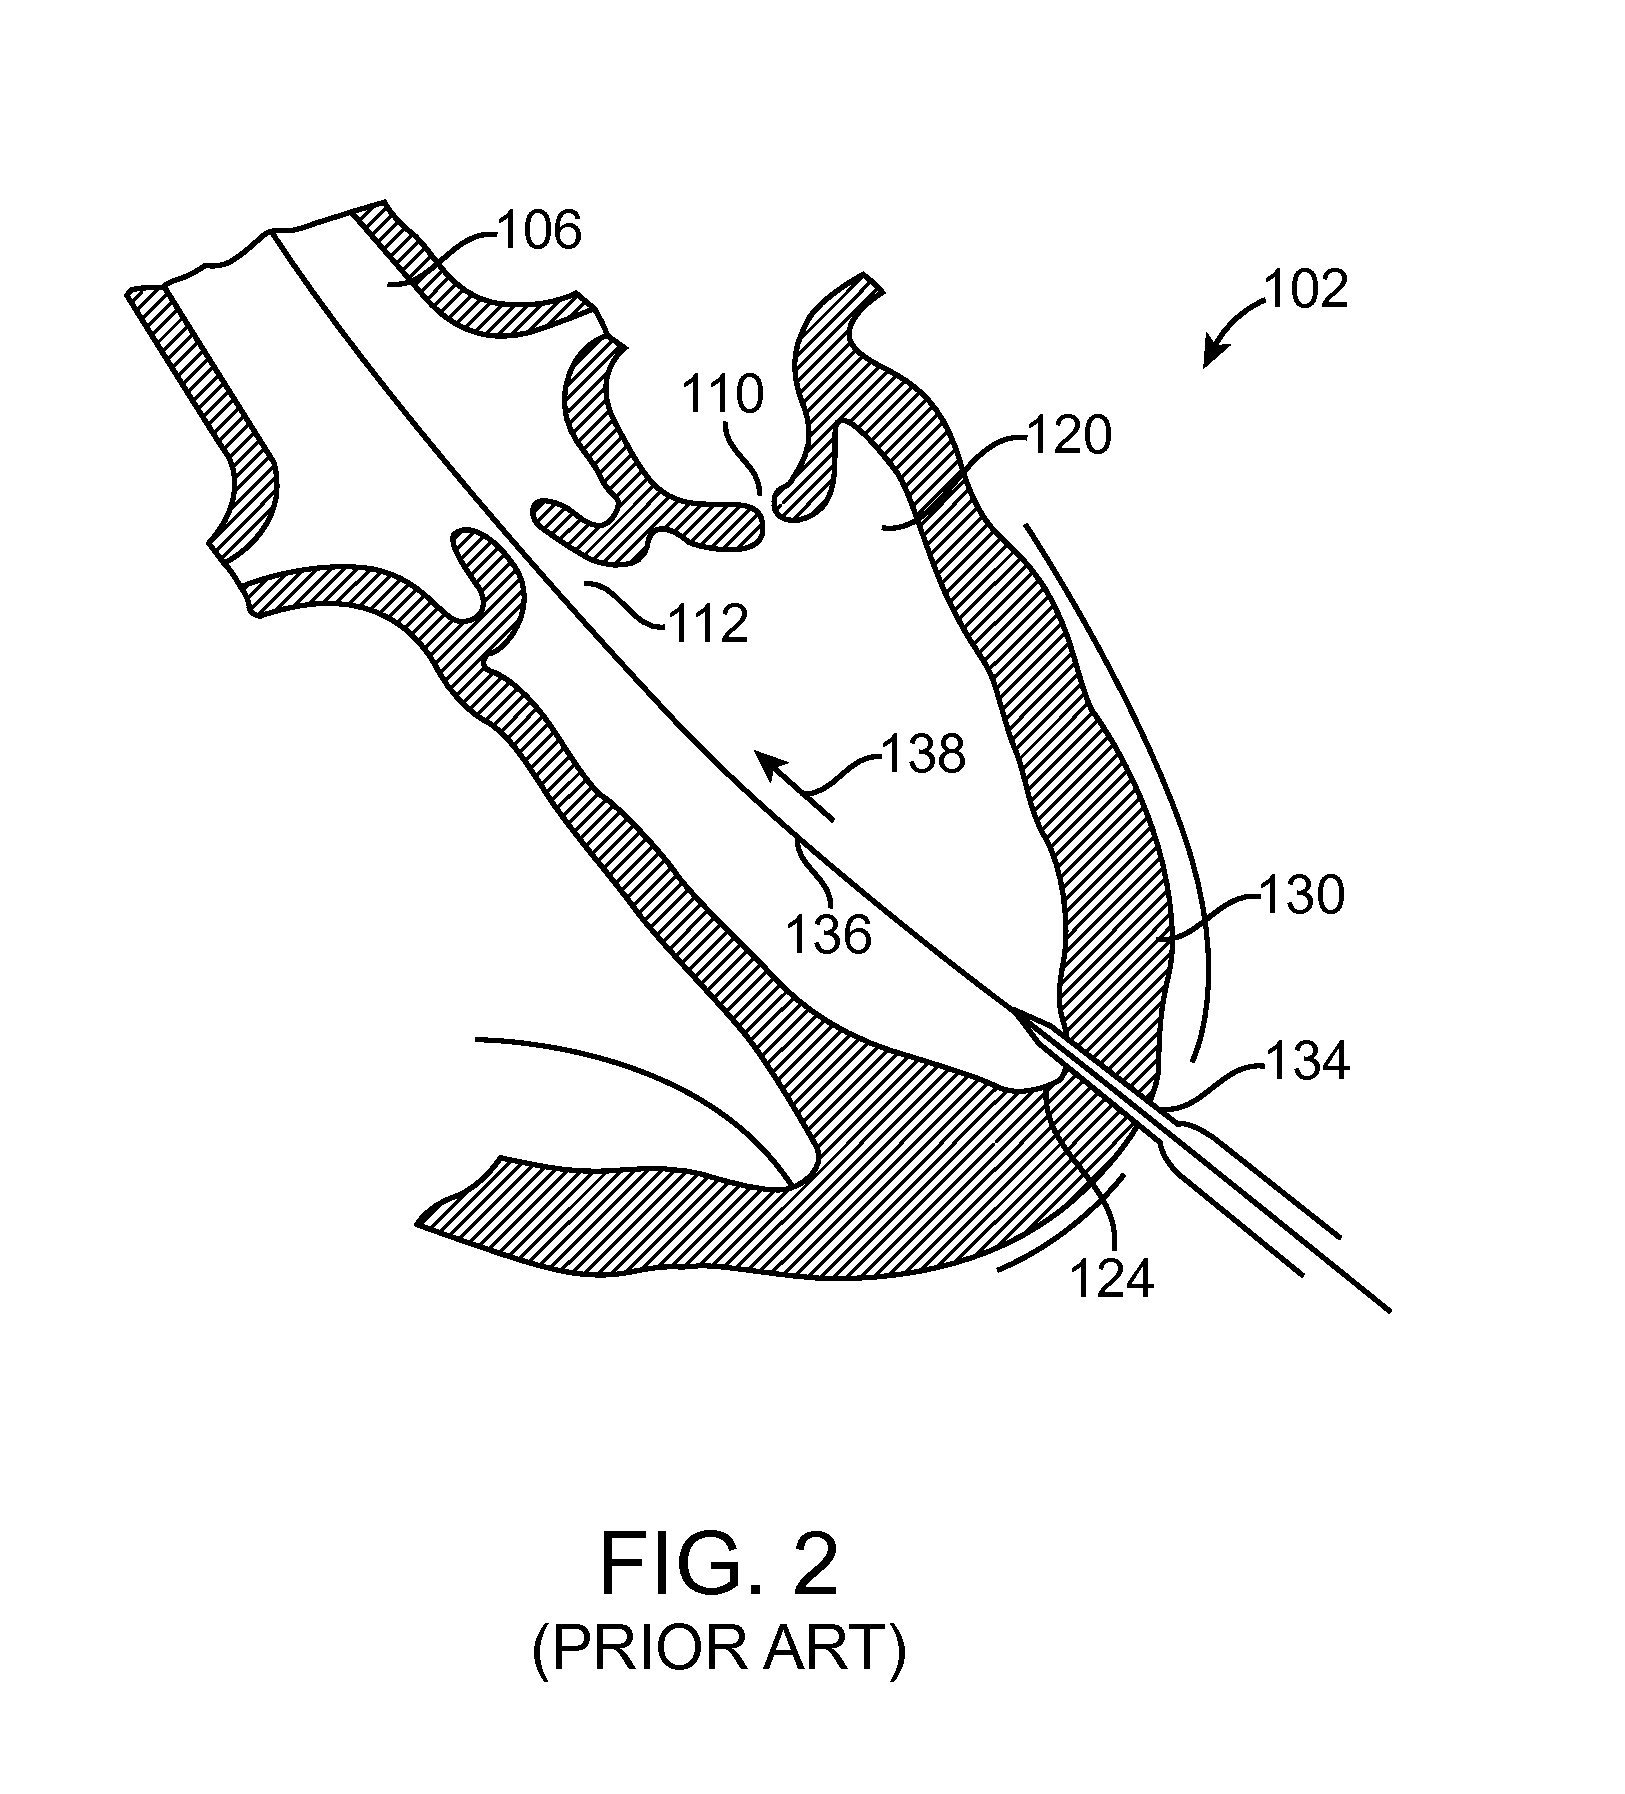 System and method for providing access and closure to tissue